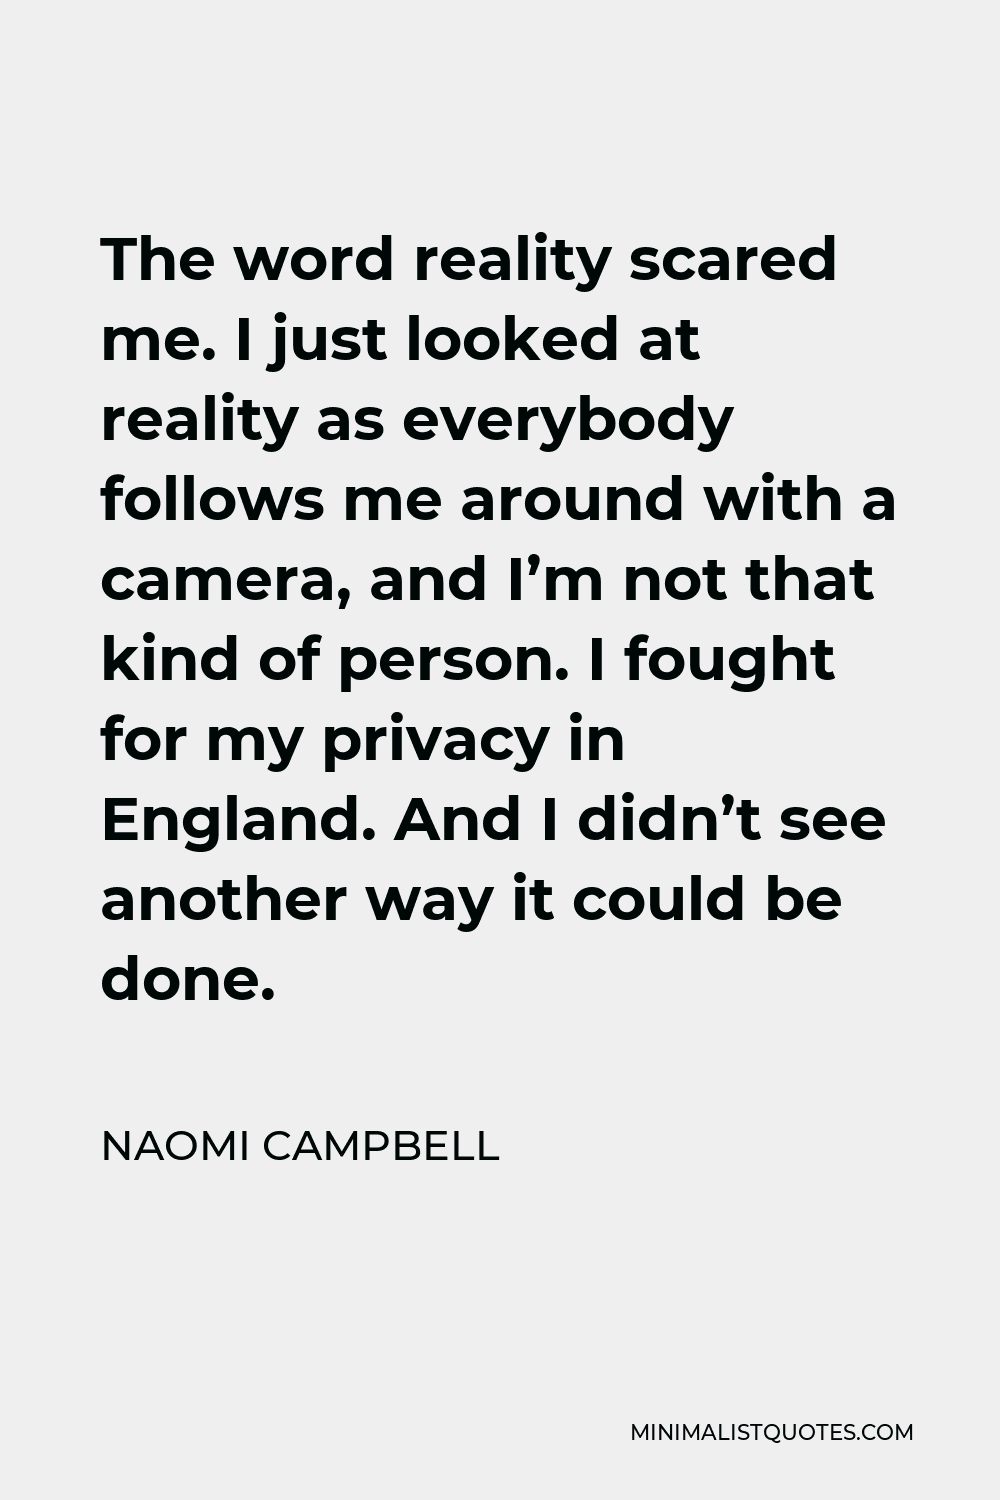 Naomi Campbell Quote - The word reality scared me. I just looked at reality as everybody follows me around with a camera, and I’m not that kind of person. I fought for my privacy in England. And I didn’t see another way it could be done.